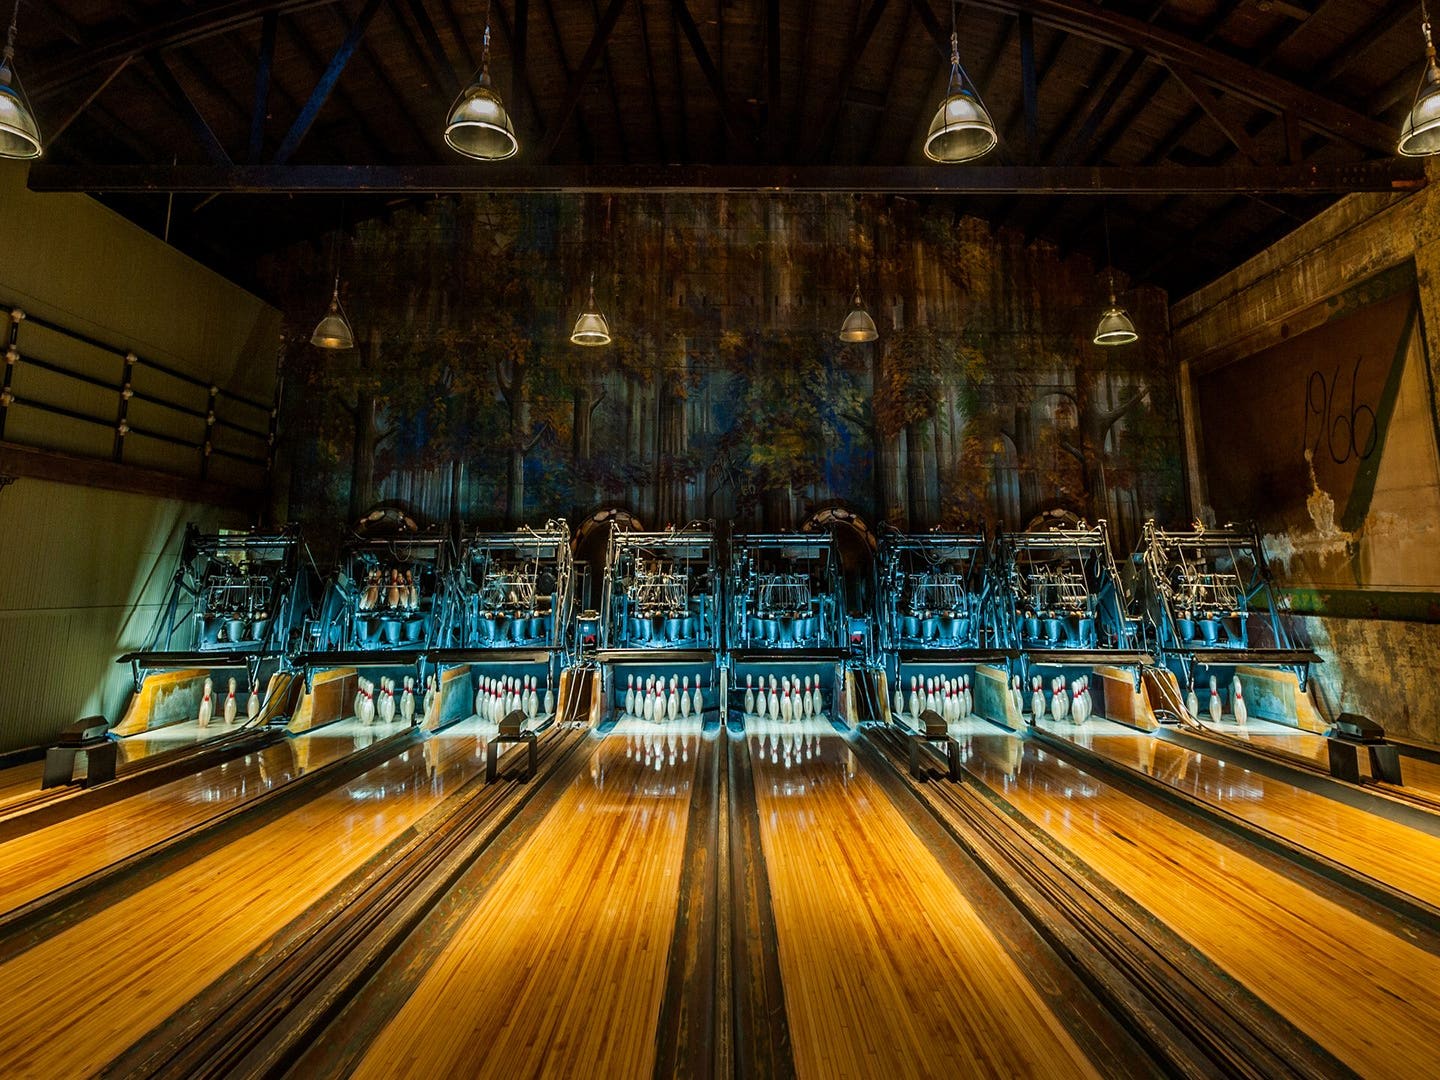 Hey Man, It's the Best Bowling Alleys in Los Angeles | Discover Los Angeles